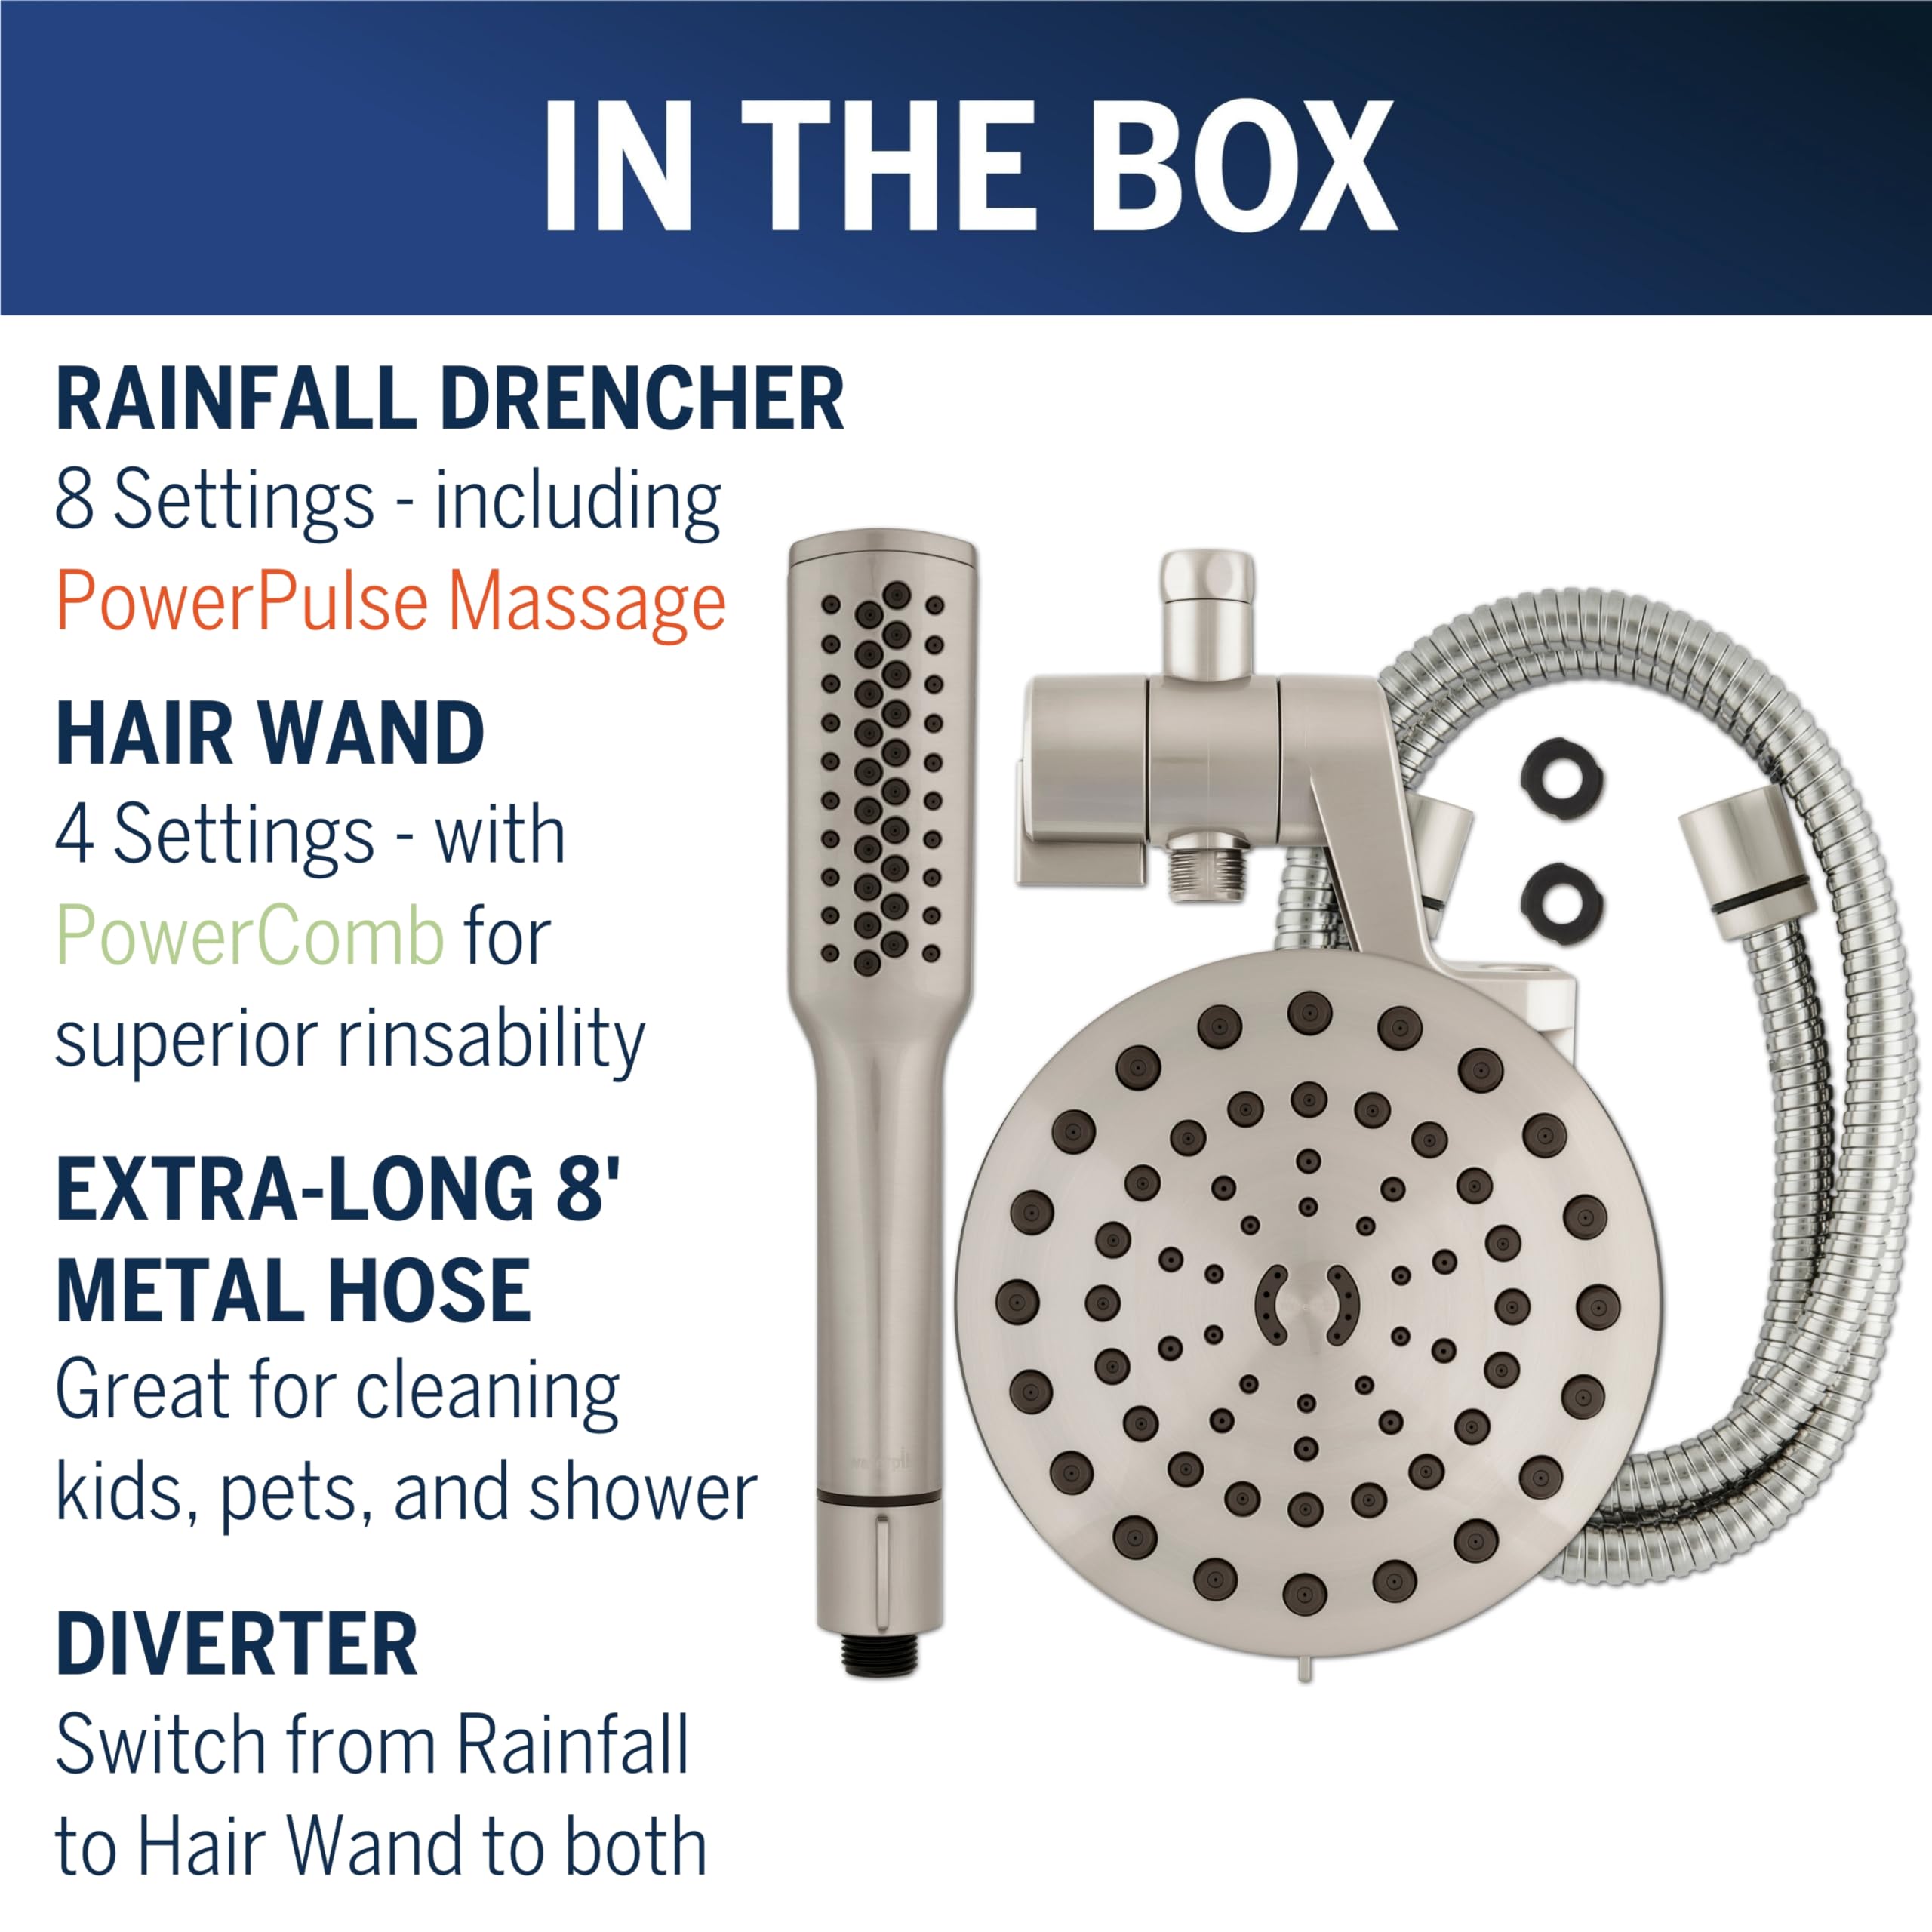 Waterpik High Pressure Pulsating Shower Wand and Rain Shower Head Combo with Extra-Long 8-Foot Metal Hose, HairWand Pulse Spa System 12 Spray Modes for Hair and Body, Brushed Nickel